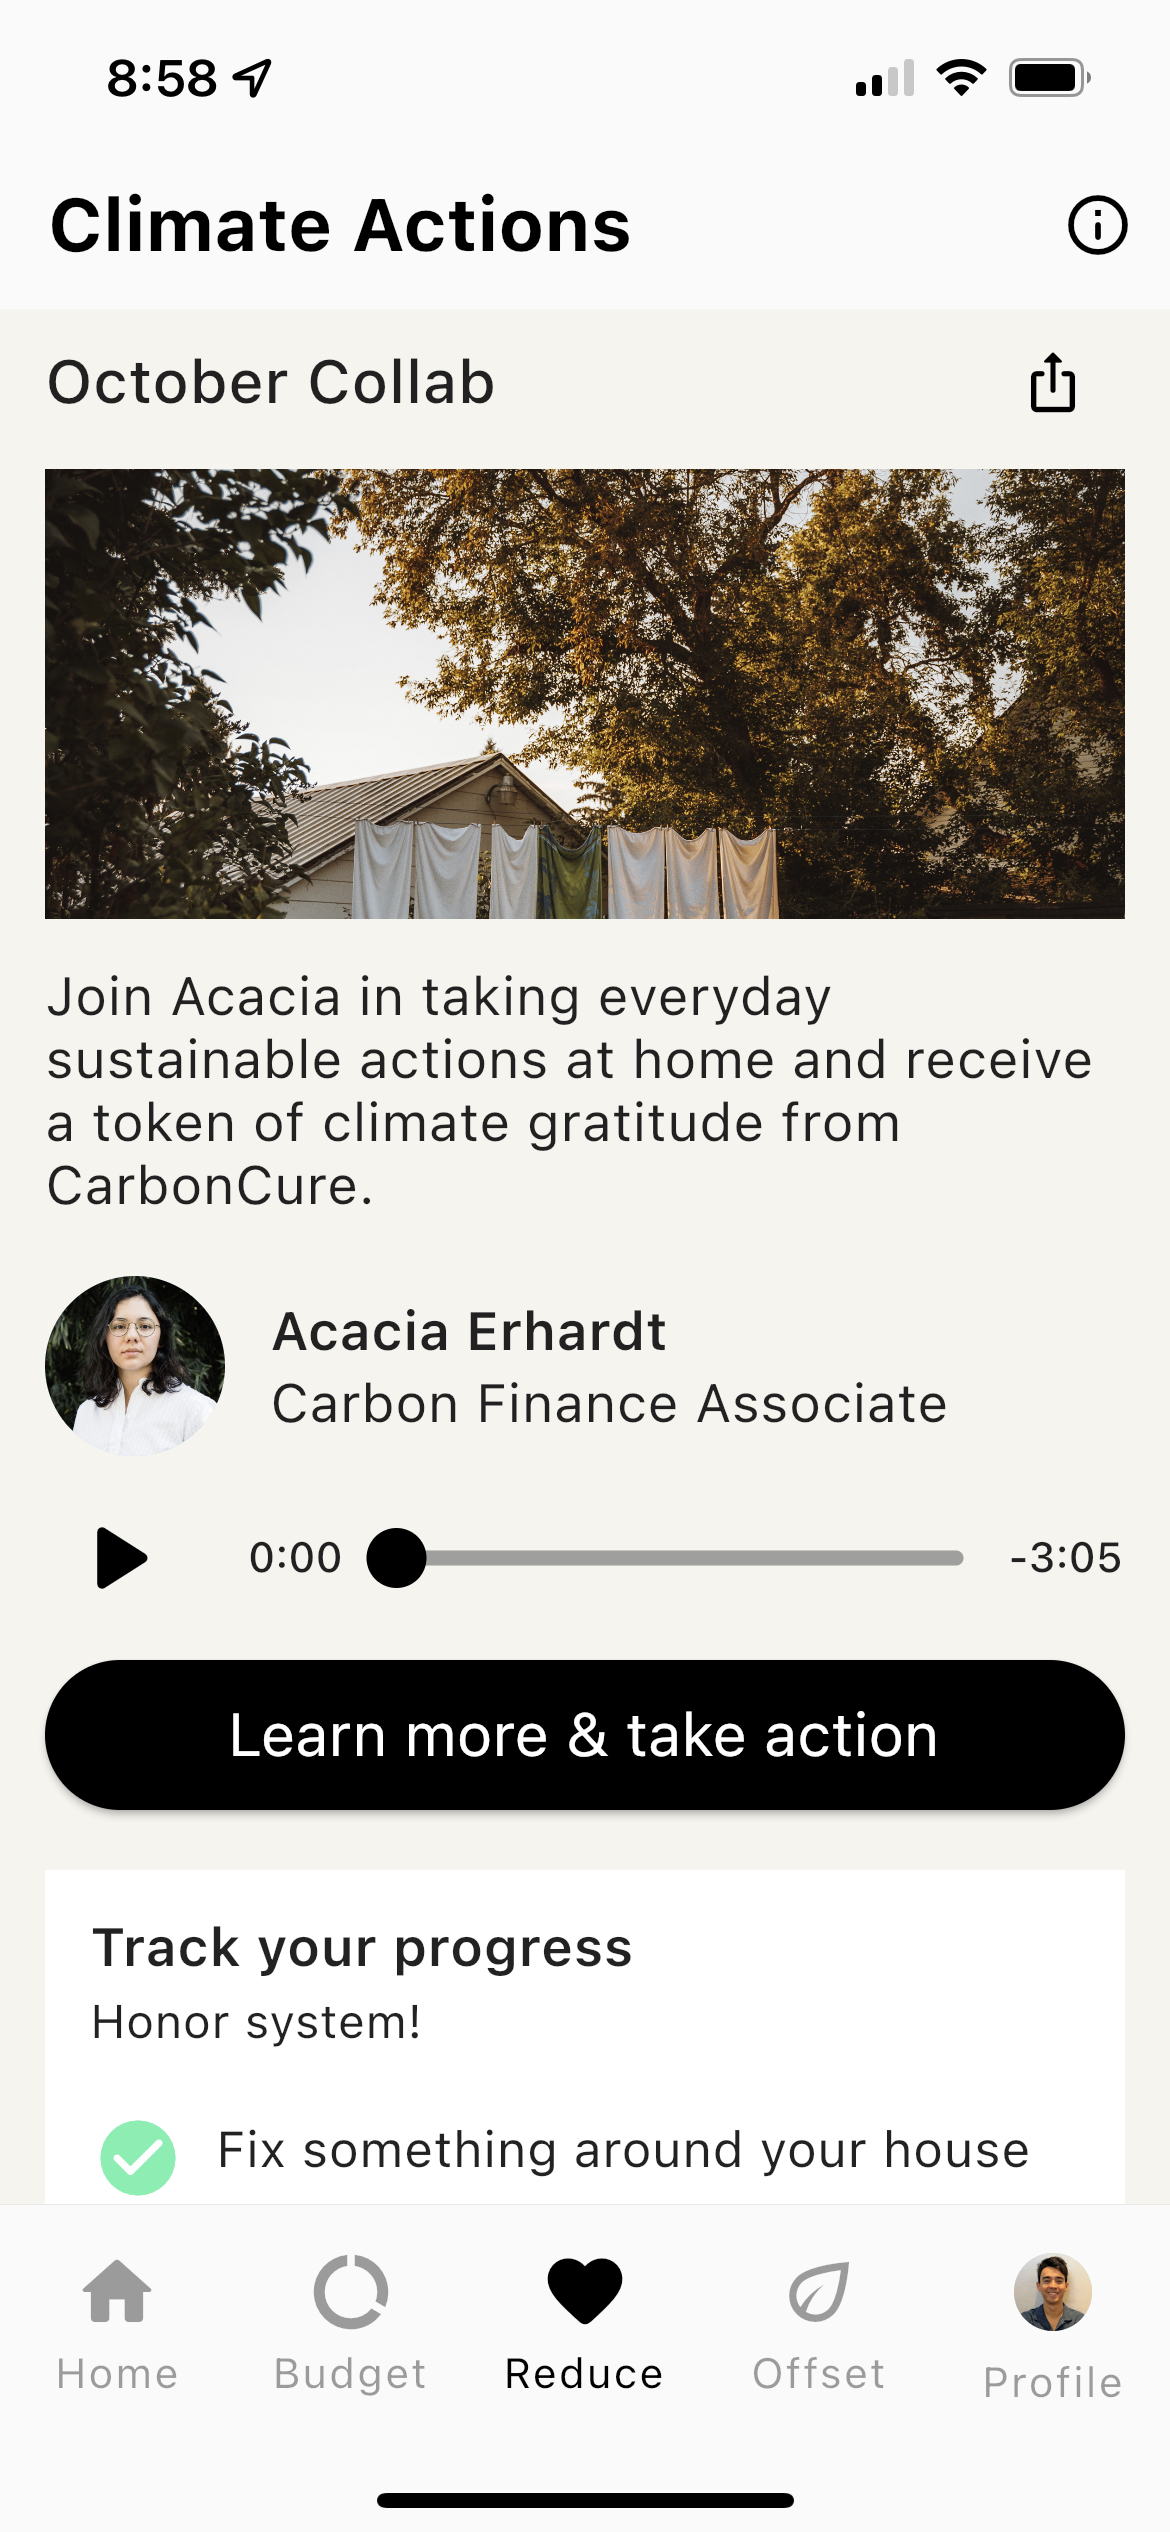 Climate Actions screen